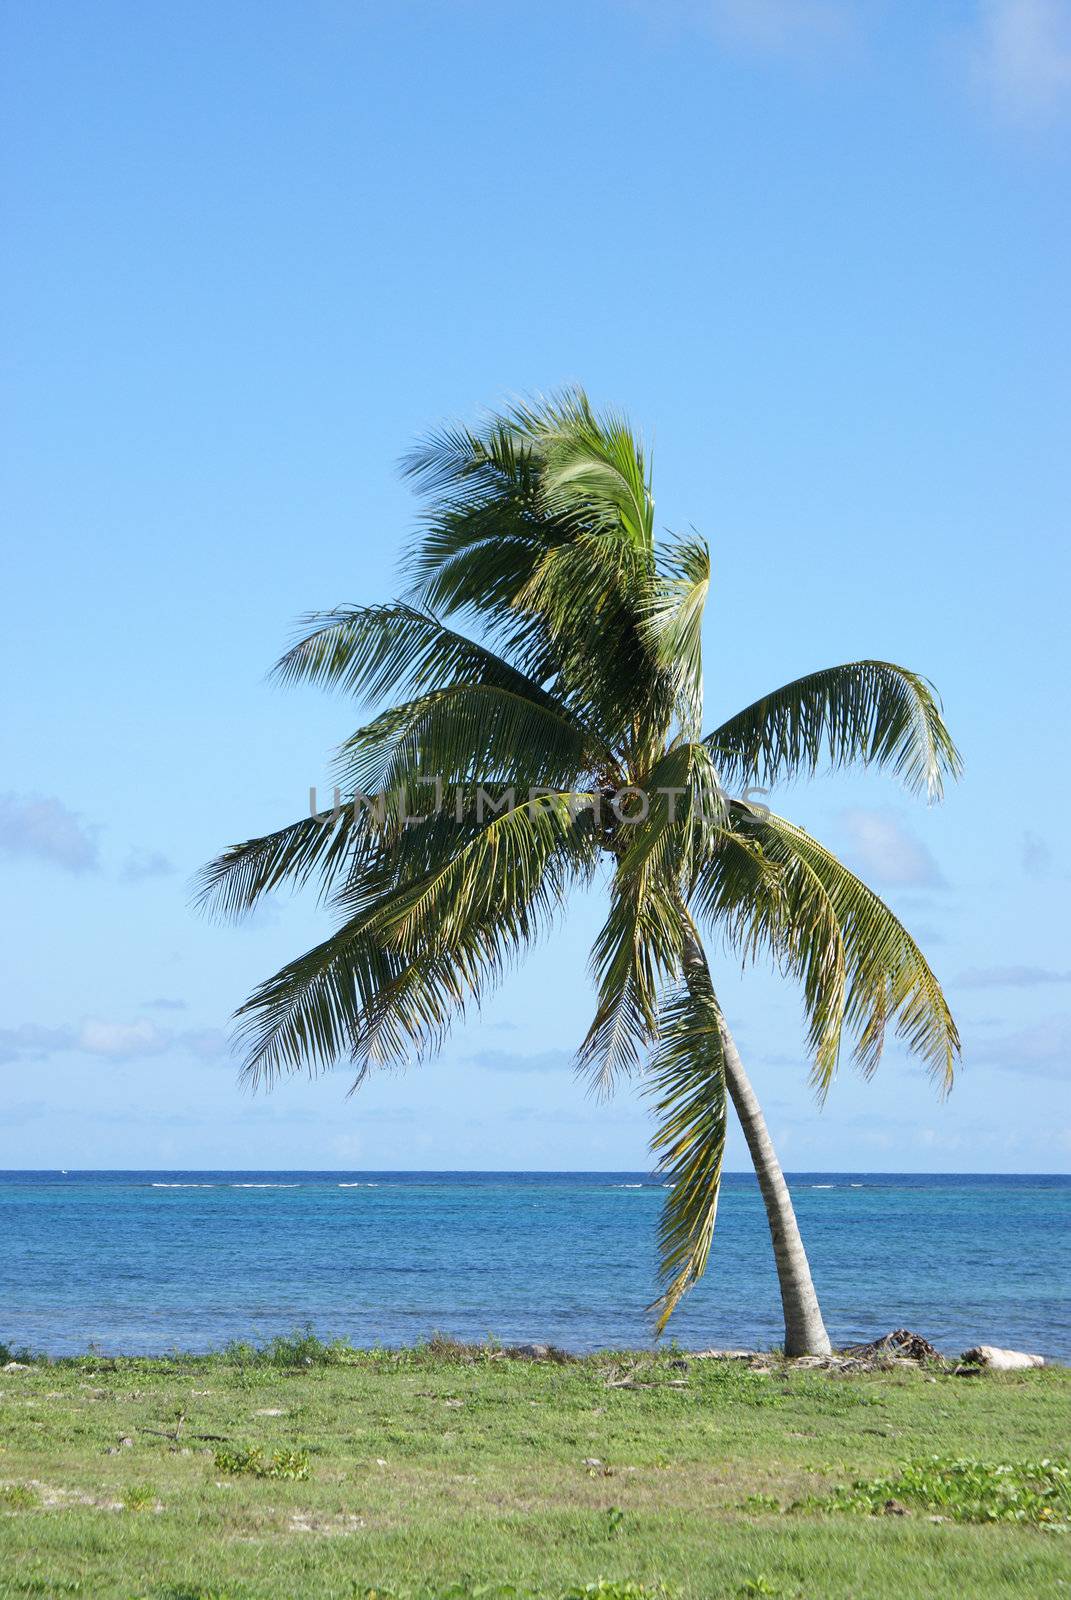 A palm tree on the shoreline looking over the ocean.